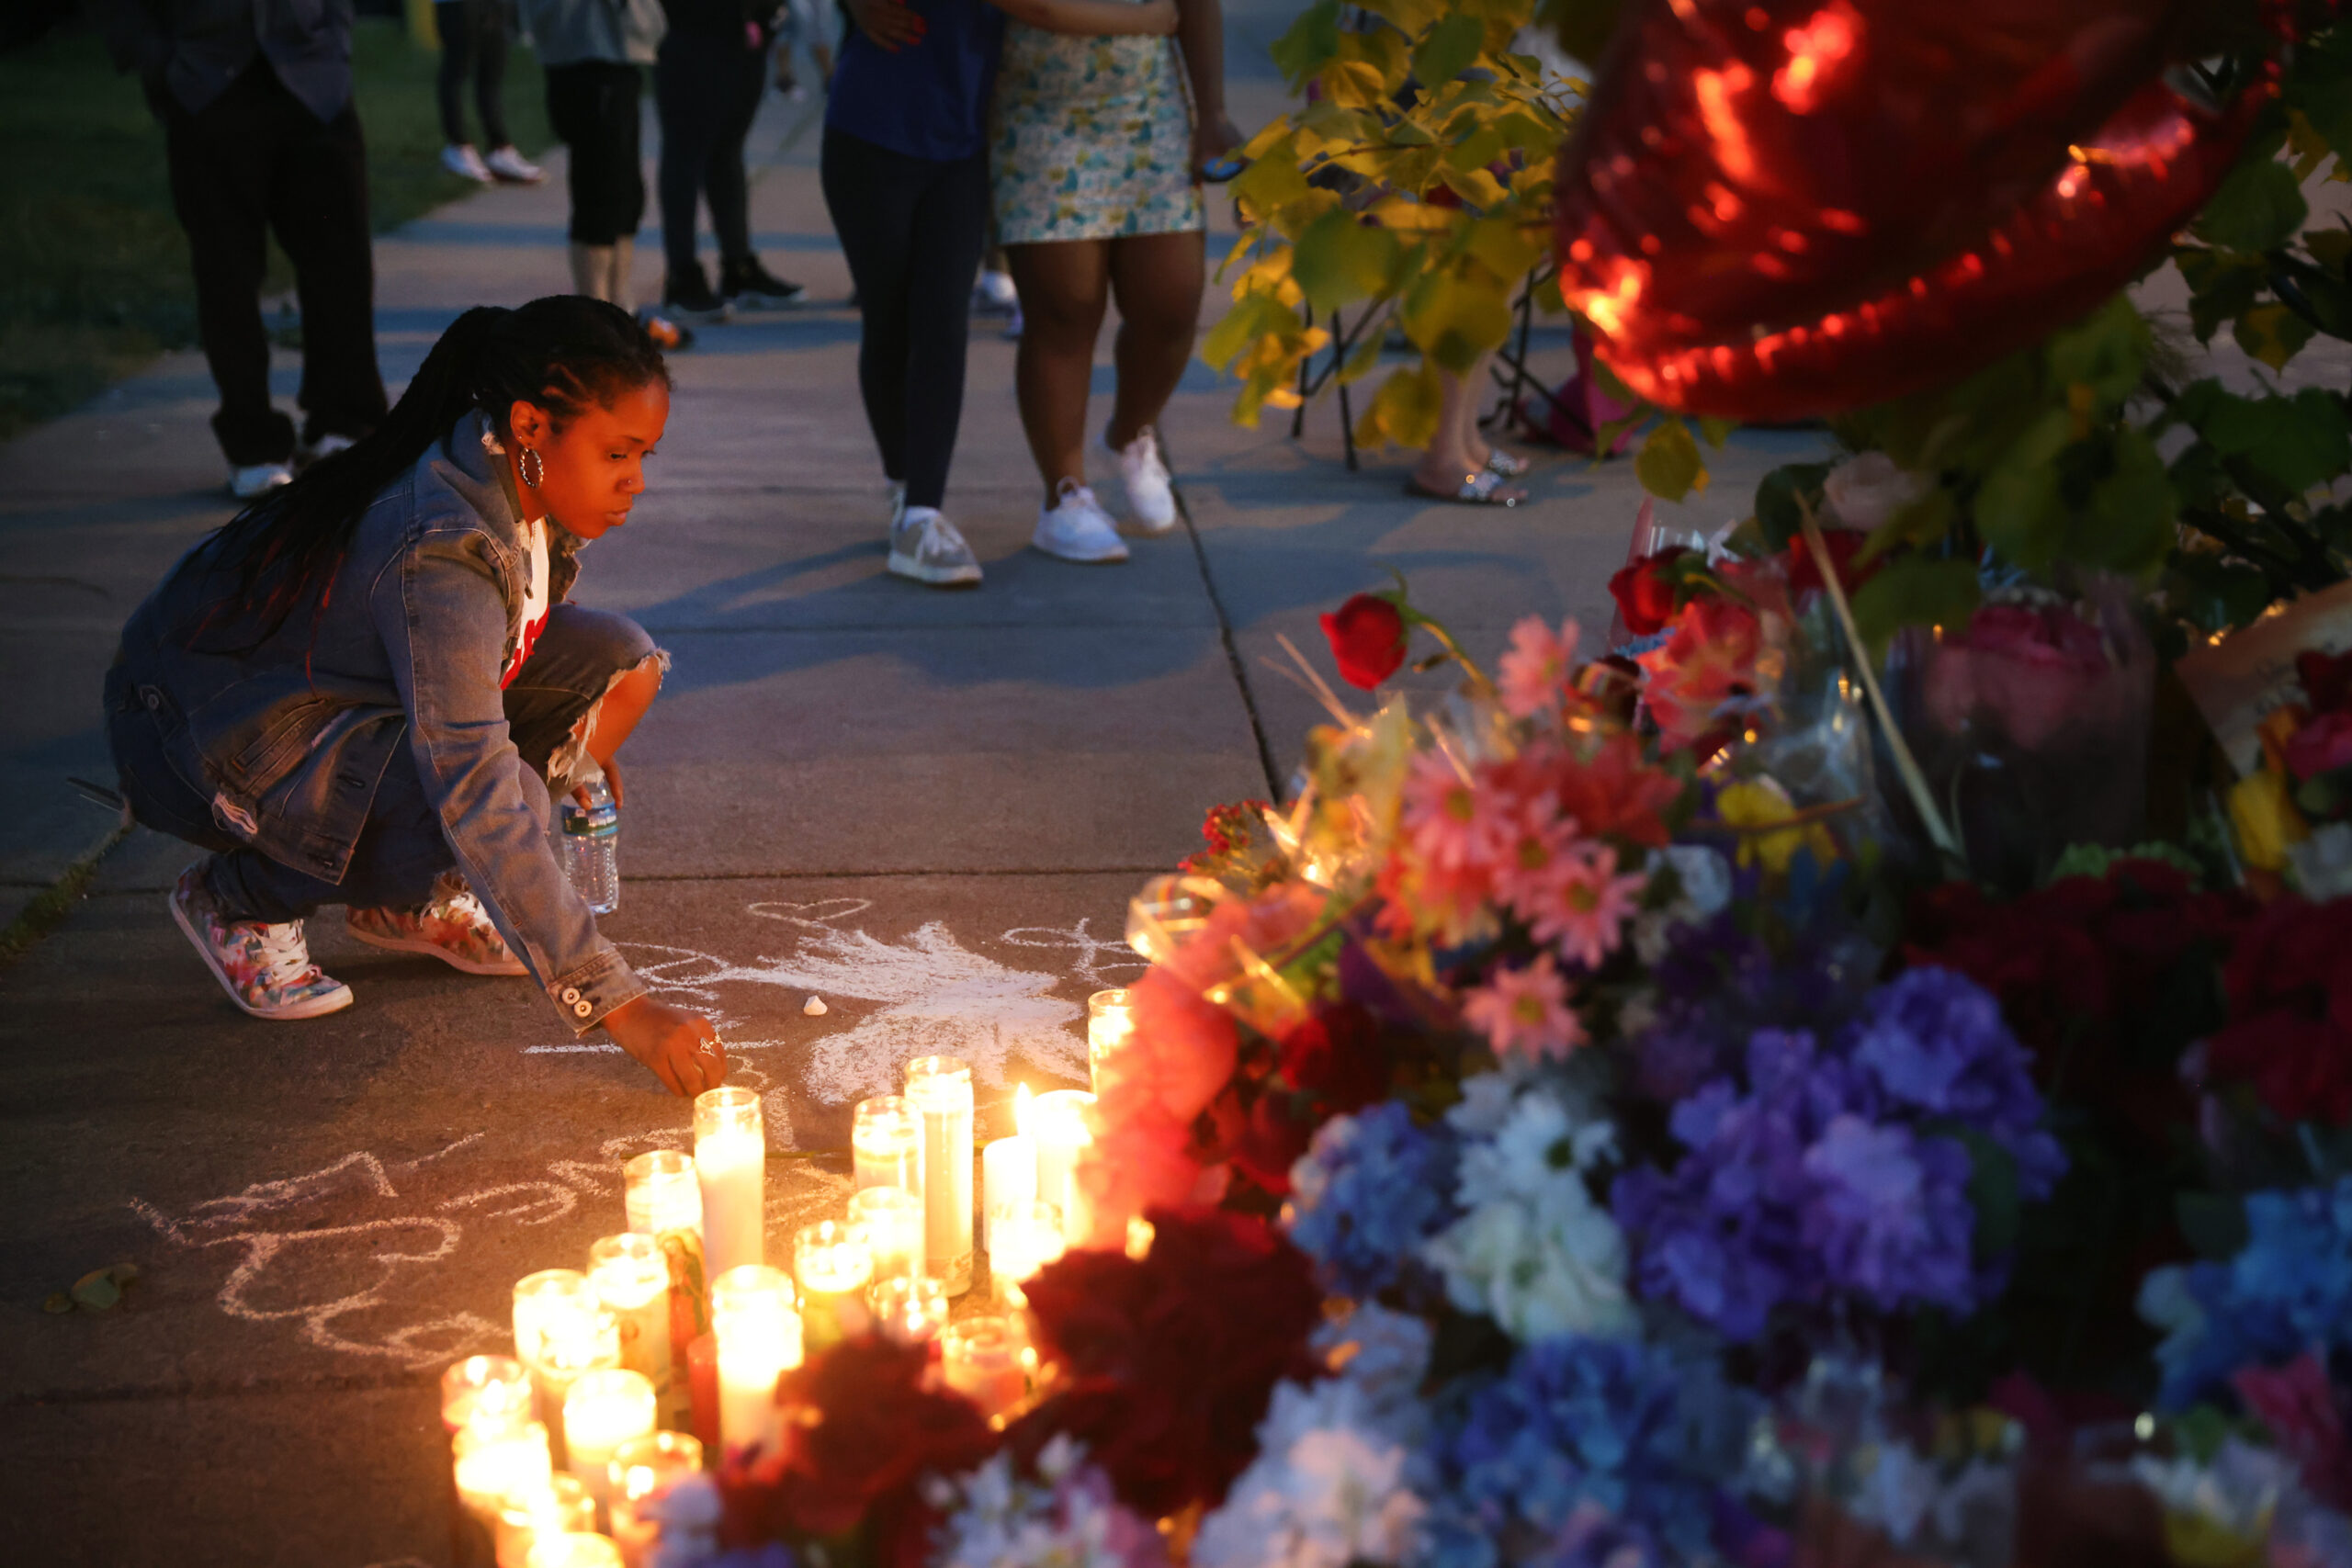 A memorial outside of Tops market after a gunman opened fire at the store in Buffalo, New York on May 15, 2022 [Scott Olson/Getty Images]